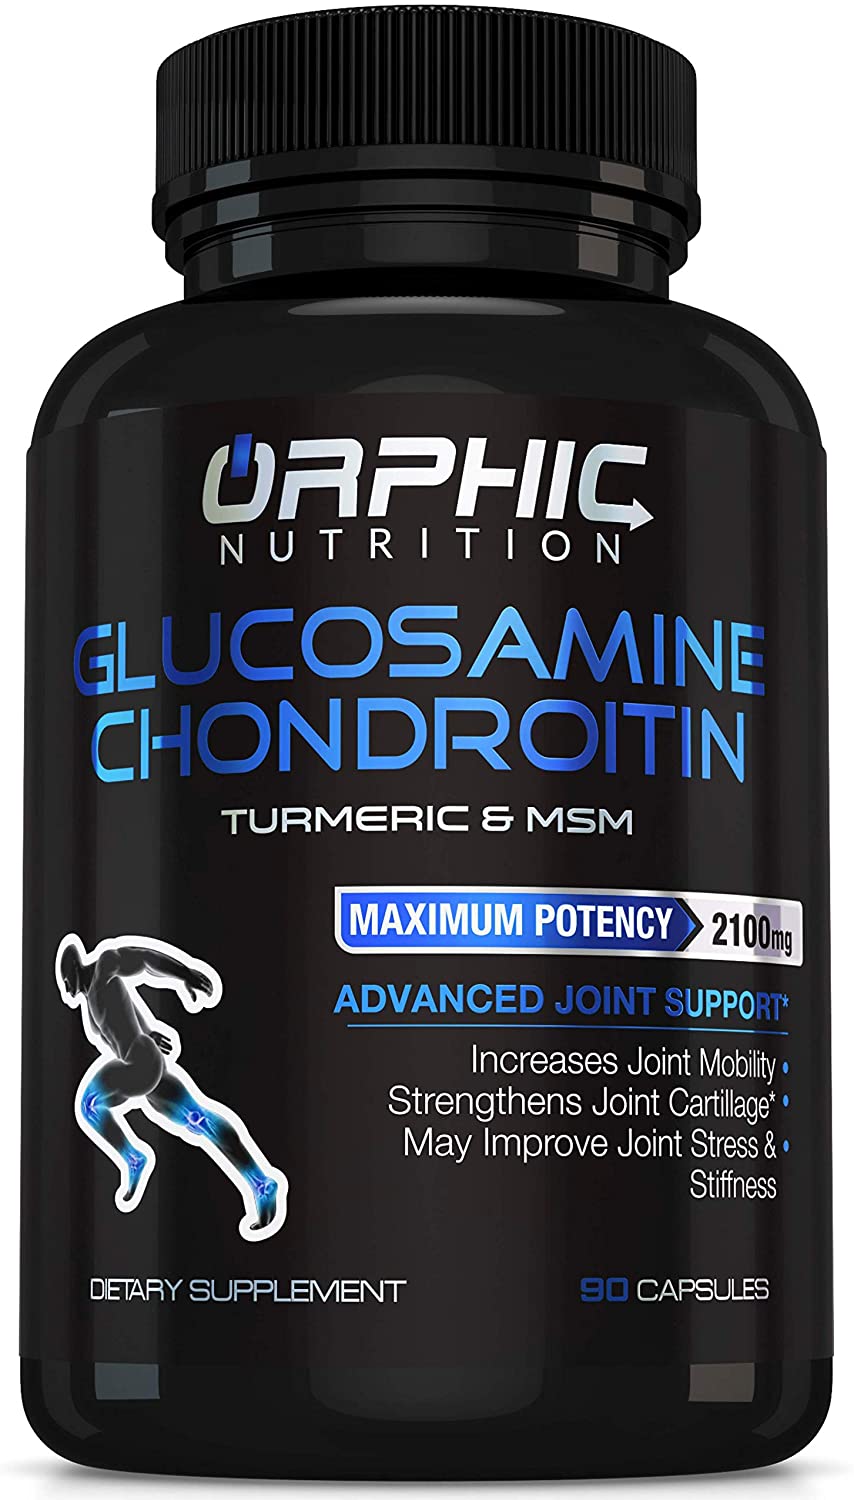 Orphic Nutrition Glucosamine Chondroitin with Turmeric & MSM is 10 Supplements for Joint Pain, Best Joint Supplements For Elderly In Singapore, Best Joint Supplements in Singapore, best joint supplements for athletes, best joint supplement for knees, Best Joint Supplements Review, What is the best supplement for knee joints?, What joint supplement do doctors recommend?, What is the safest joint supplement?, Does glucosamine make knees worse?, 10 Best Joint Supplements for Arthritis Pain & Knee Injury, Best Joint Supplements to Cut Pain and Aid Movement, best joint supplement for women, best glucosamine chondroitin supplement on the market, best joint supplement for men, best supplement for joint pain, consumer reports best joint supplements, best supplement for knee cartilage, best joint supplement 2022 consumer reports, What supplements are good for aging joints?, Is glucosamine good for old people?, What supplement is commonly taken by seniors to help alleviate arthritis pain?, What can you take to lubricate your joints?, 